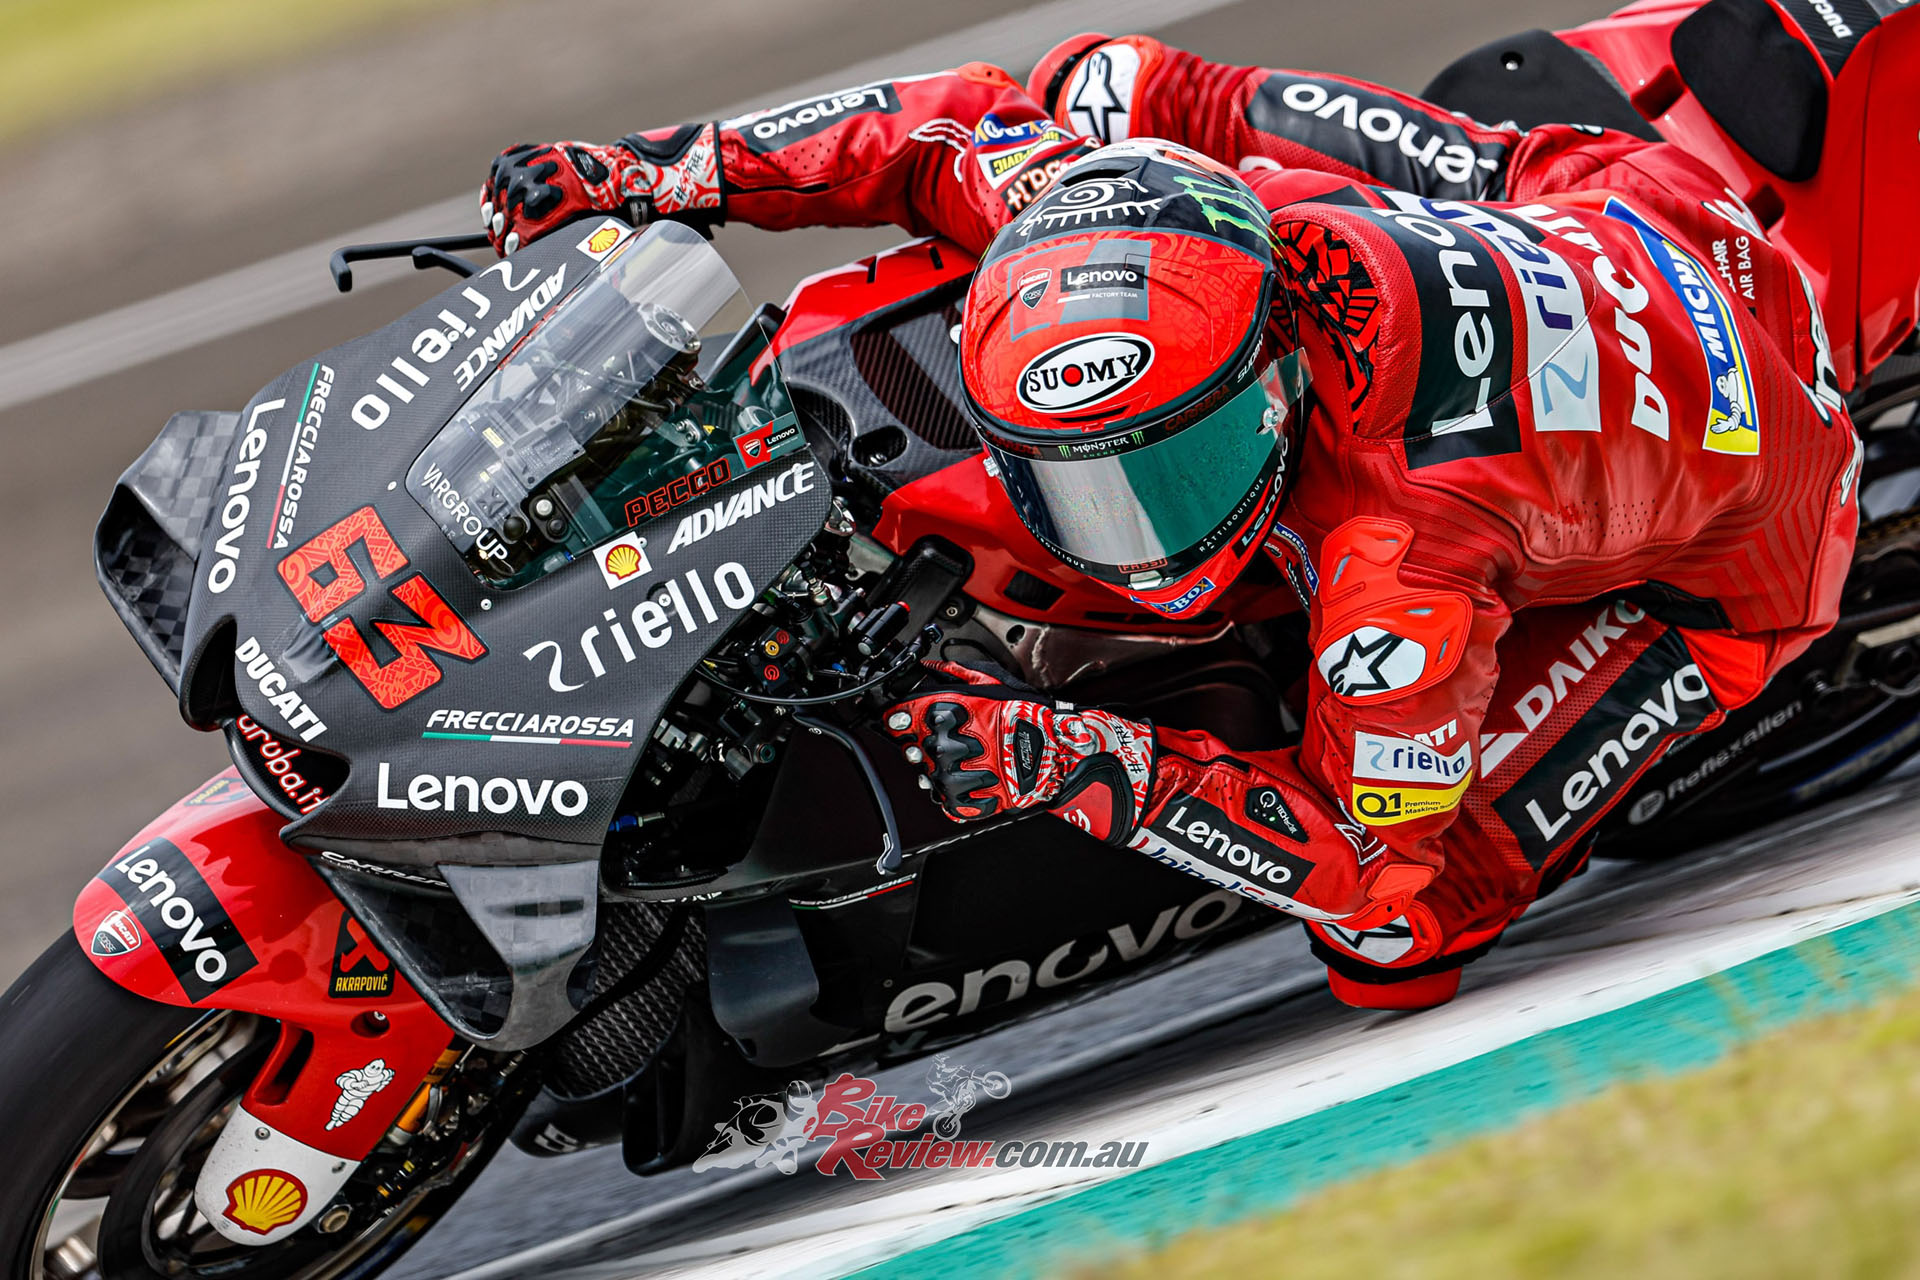 The pair of Ducati Lenovo riders put in a collective effort during testing, completing over 400 laps! 